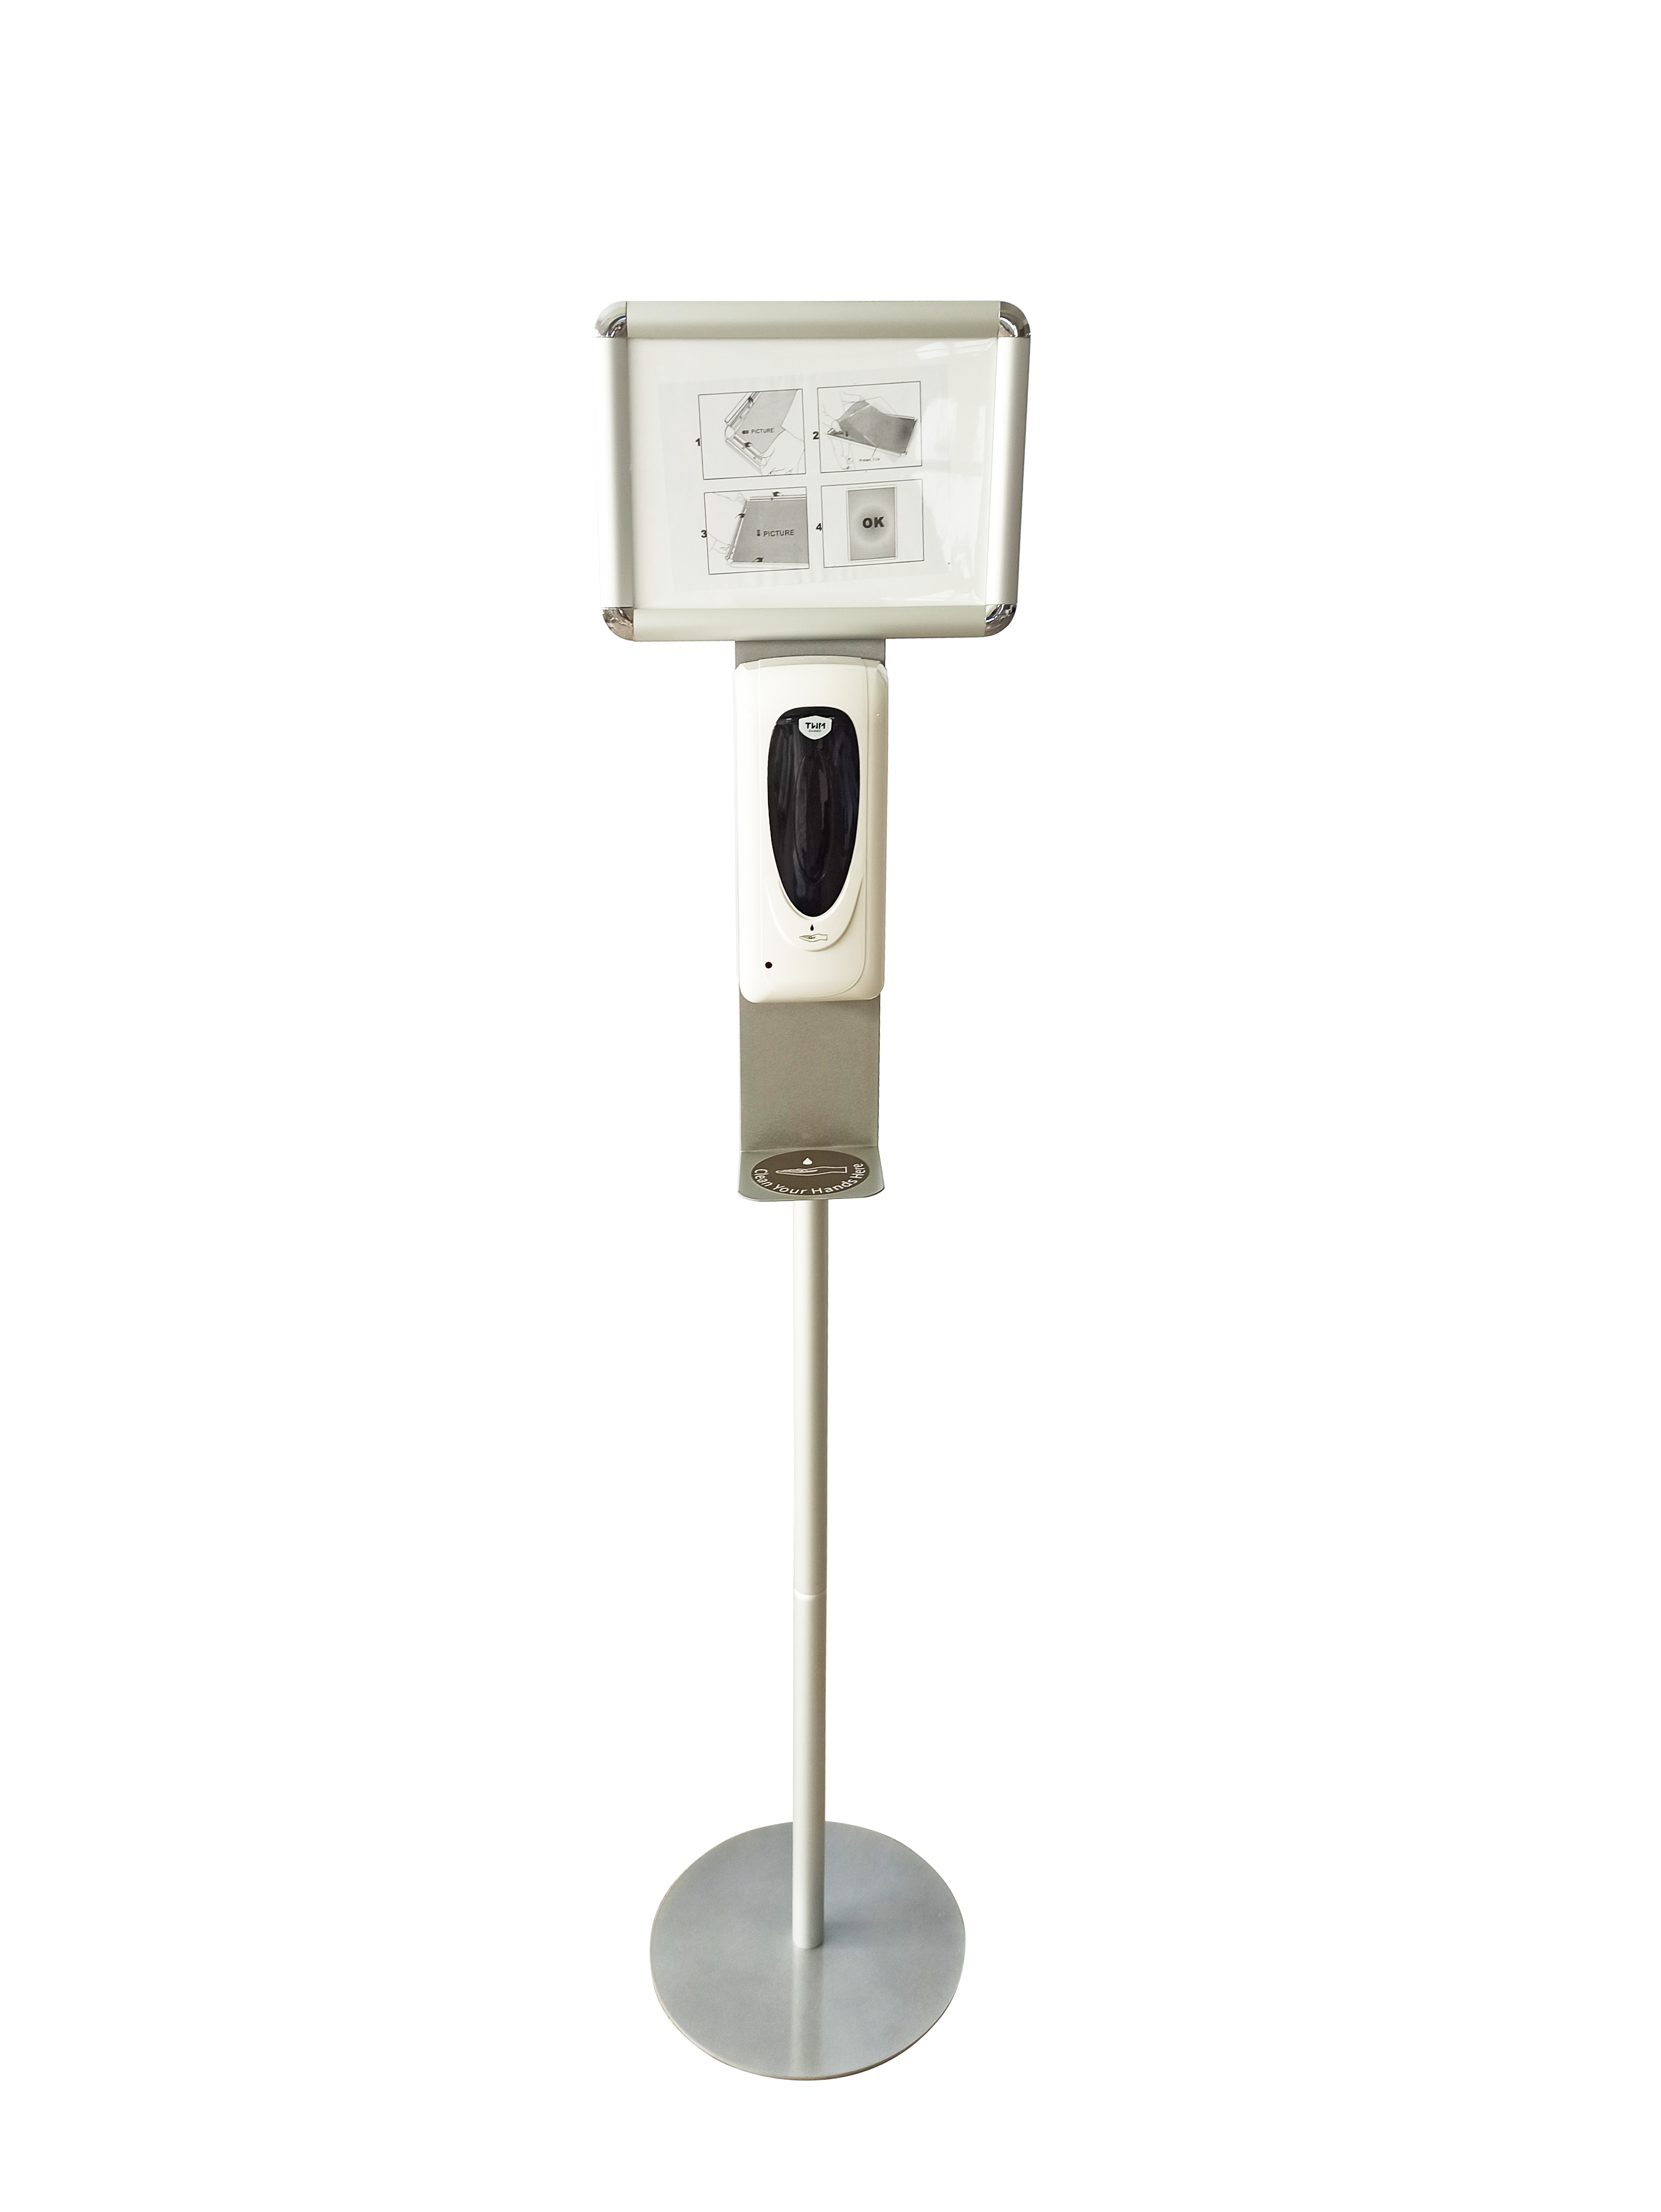 Self-standing Hand Sanitizer Stand